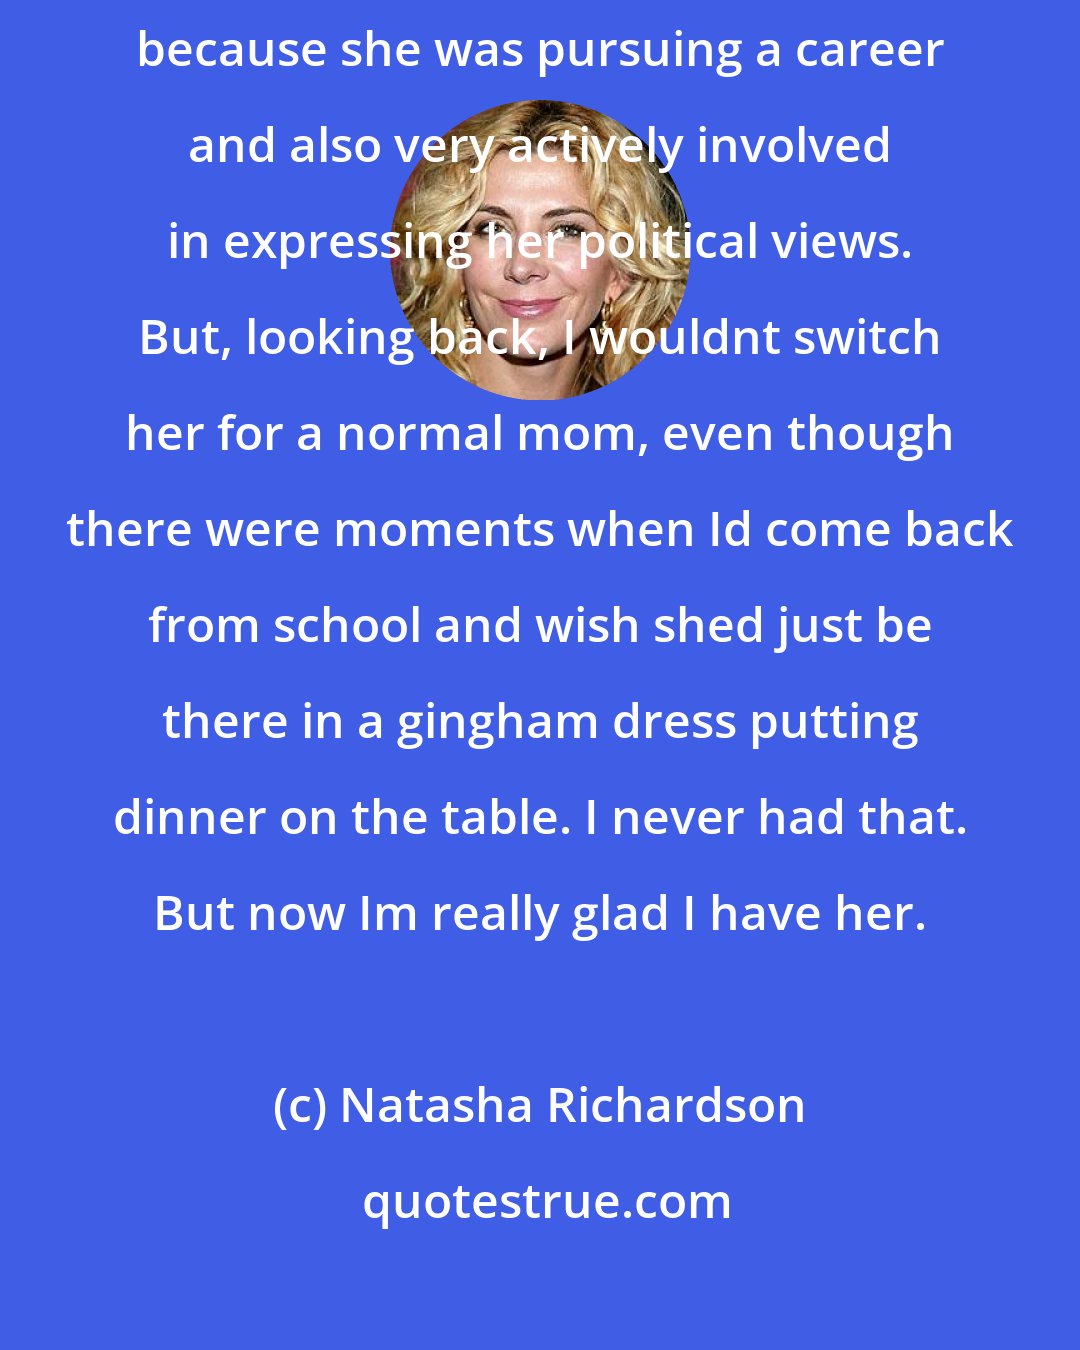 Natasha Richardson: My mother raised me and there was some painful and difficult times, because she was pursuing a career and also very actively involved in expressing her political views. But, looking back, I wouldnt switch her for a normal mom, even though there were moments when Id come back from school and wish shed just be there in a gingham dress putting dinner on the table. I never had that. But now Im really glad I have her.